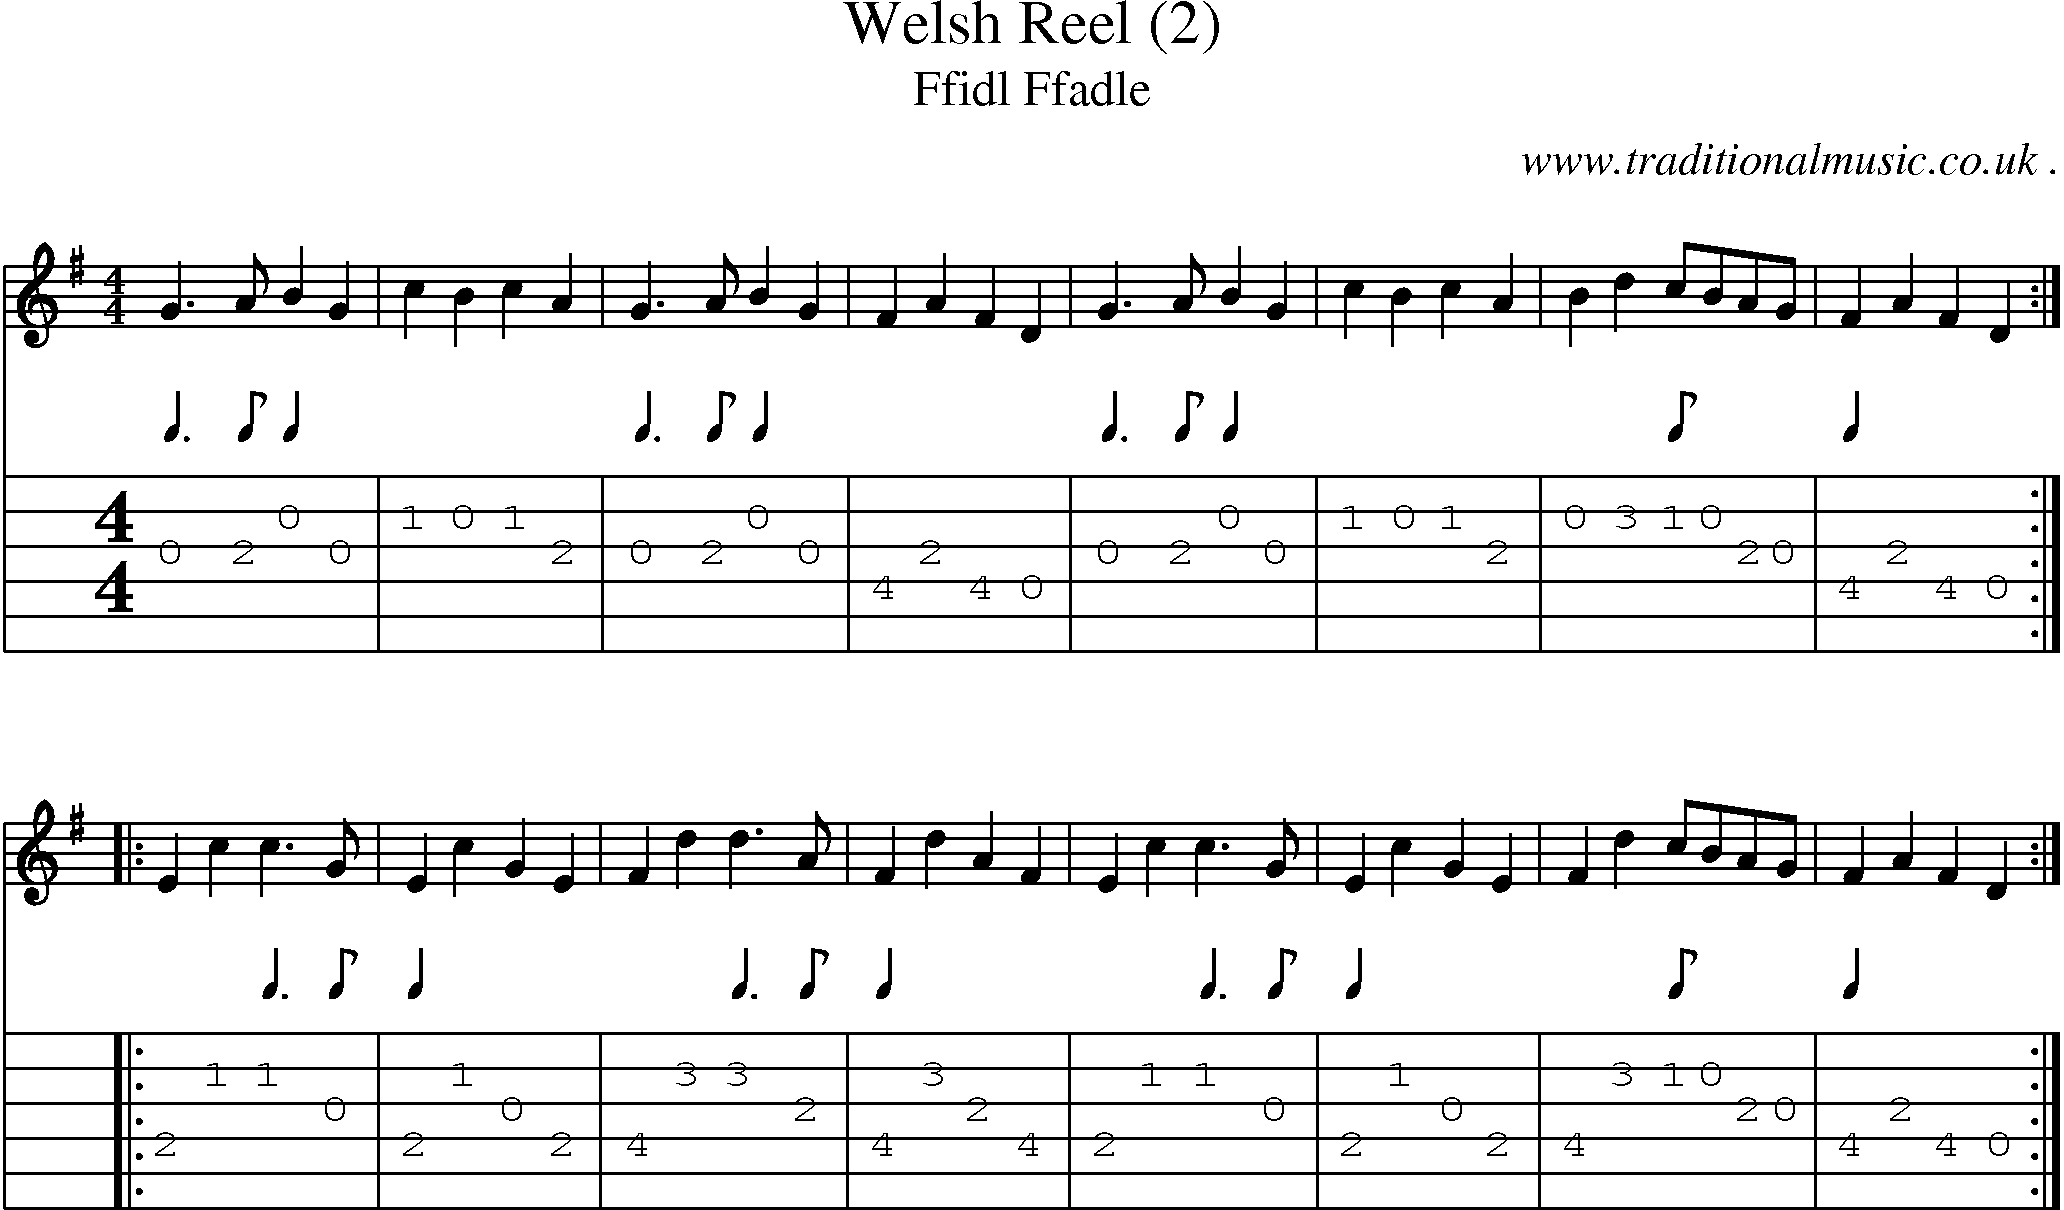 Sheet-Music and Guitar Tabs for Welsh Reel (2)